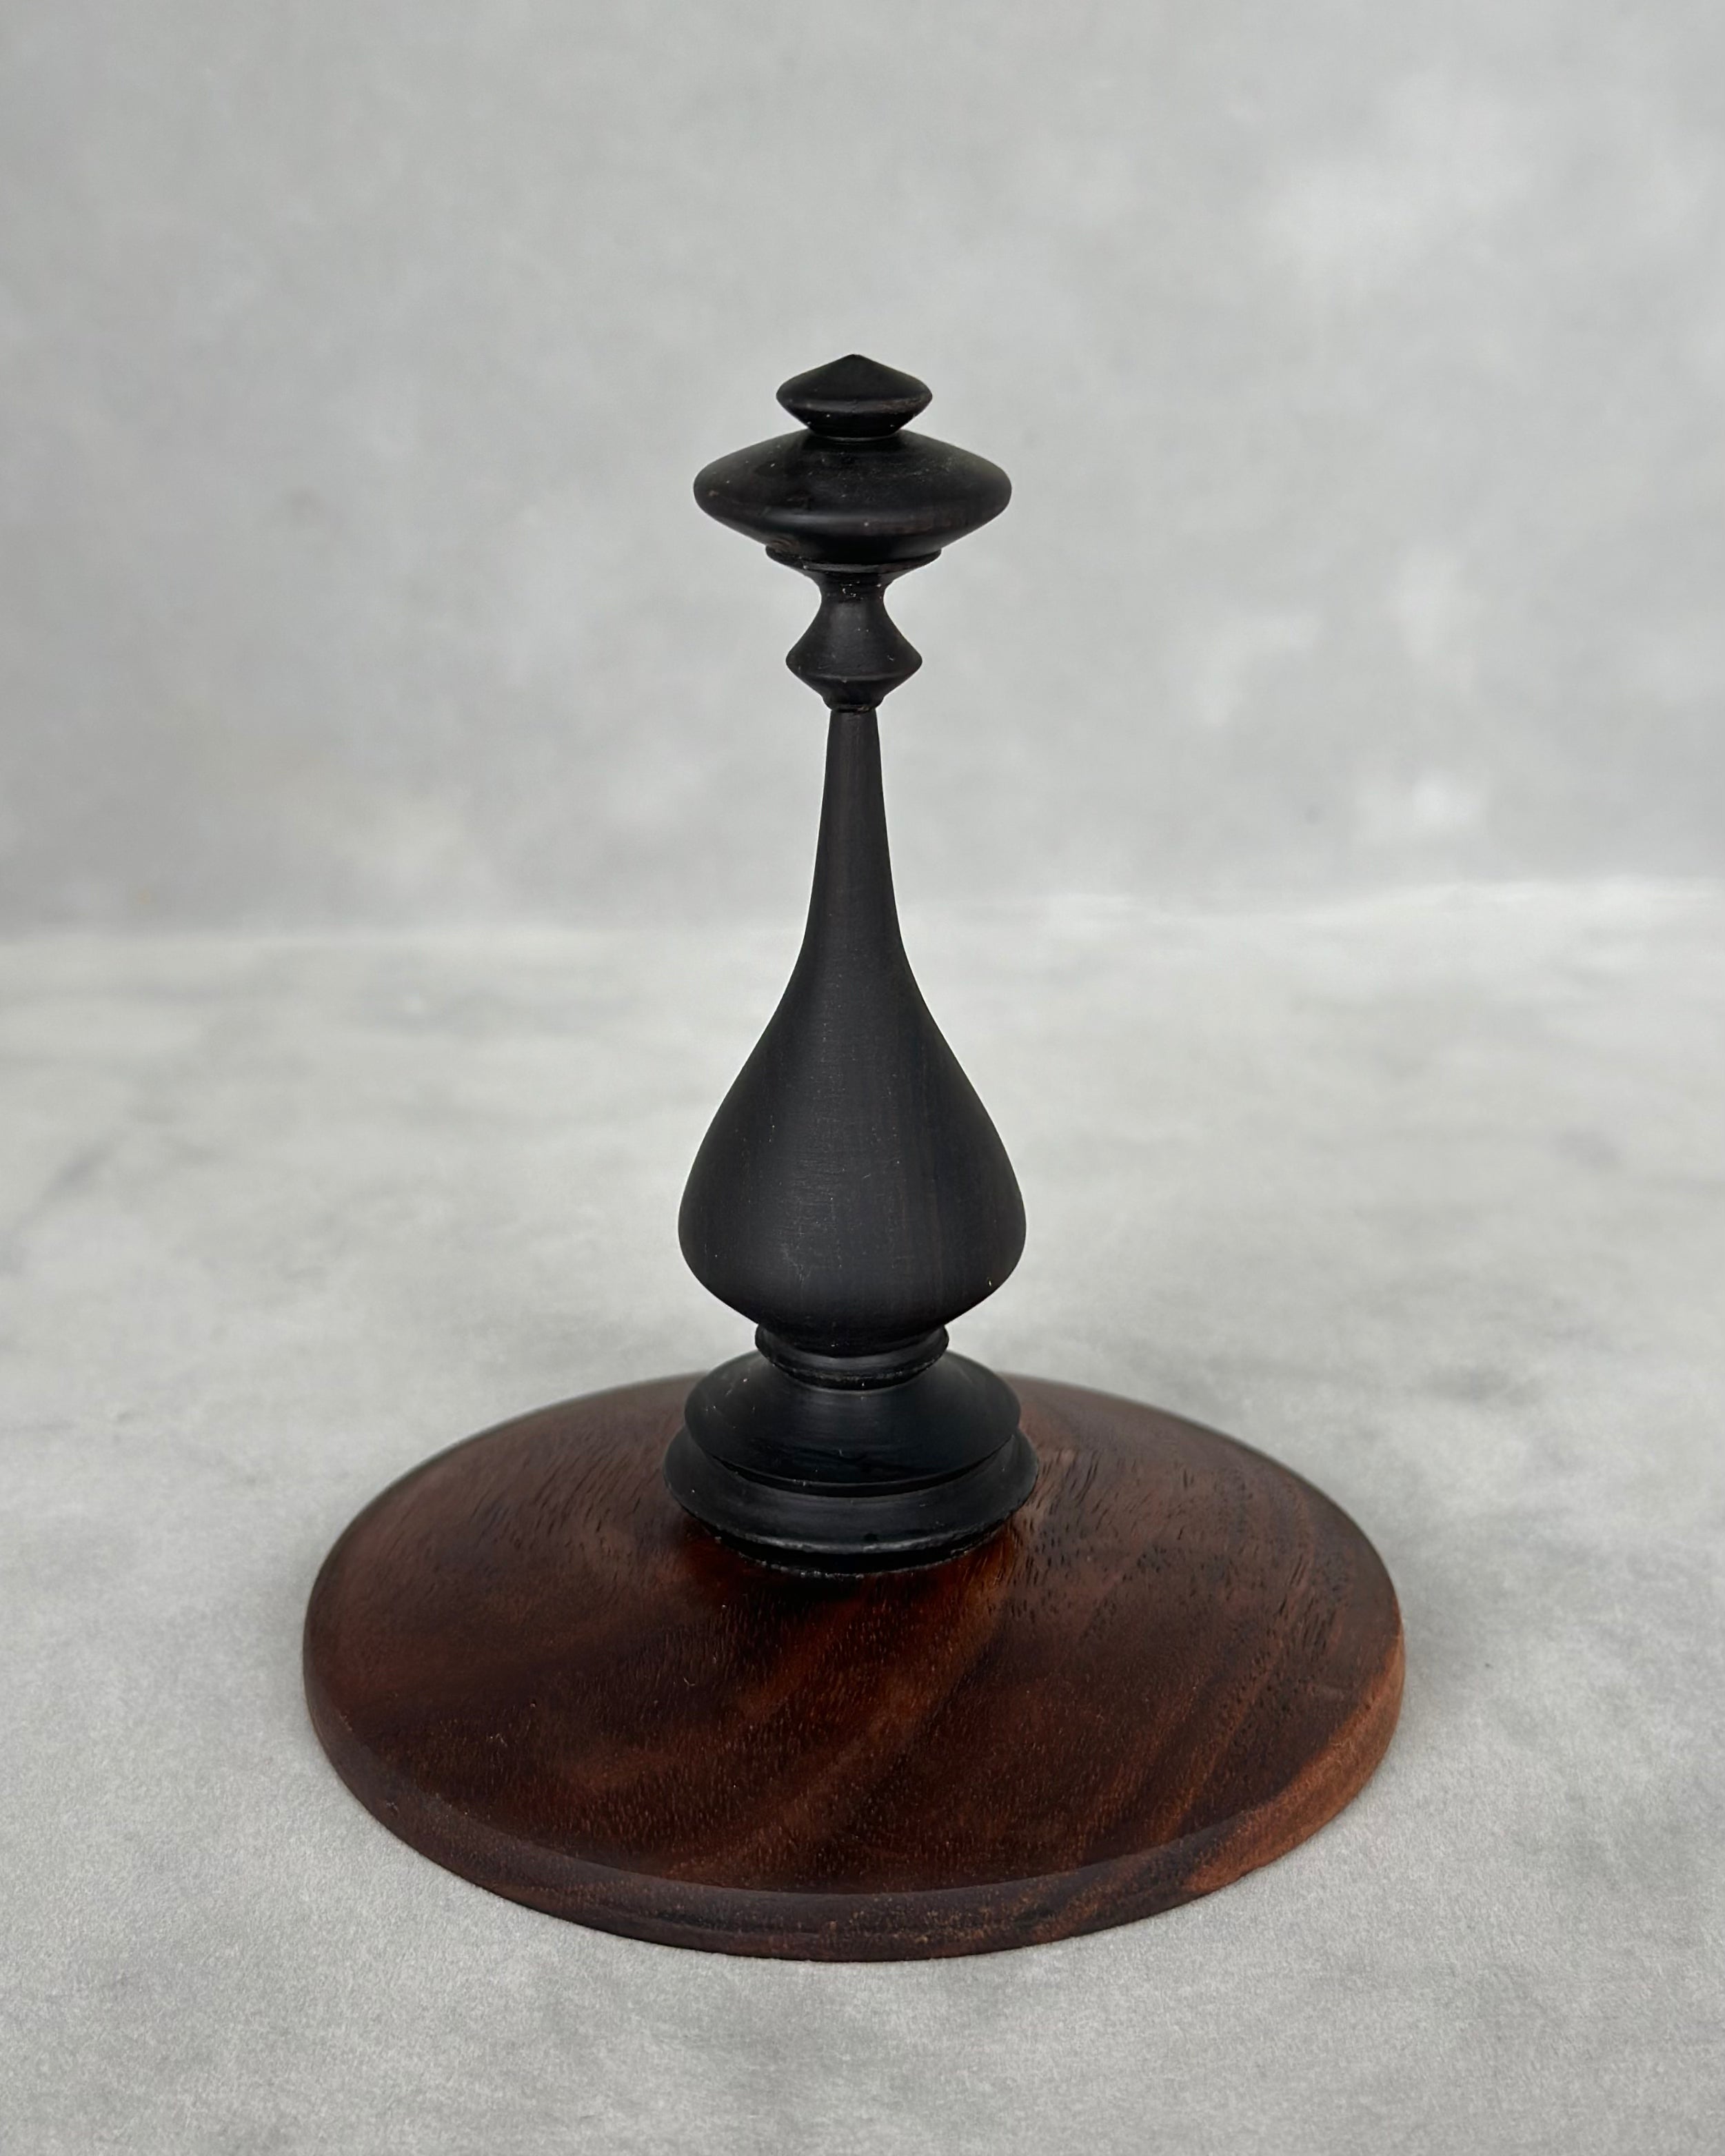 Figured Maple Hollow Form with Black Walnut Lid and African Blackwood Finial